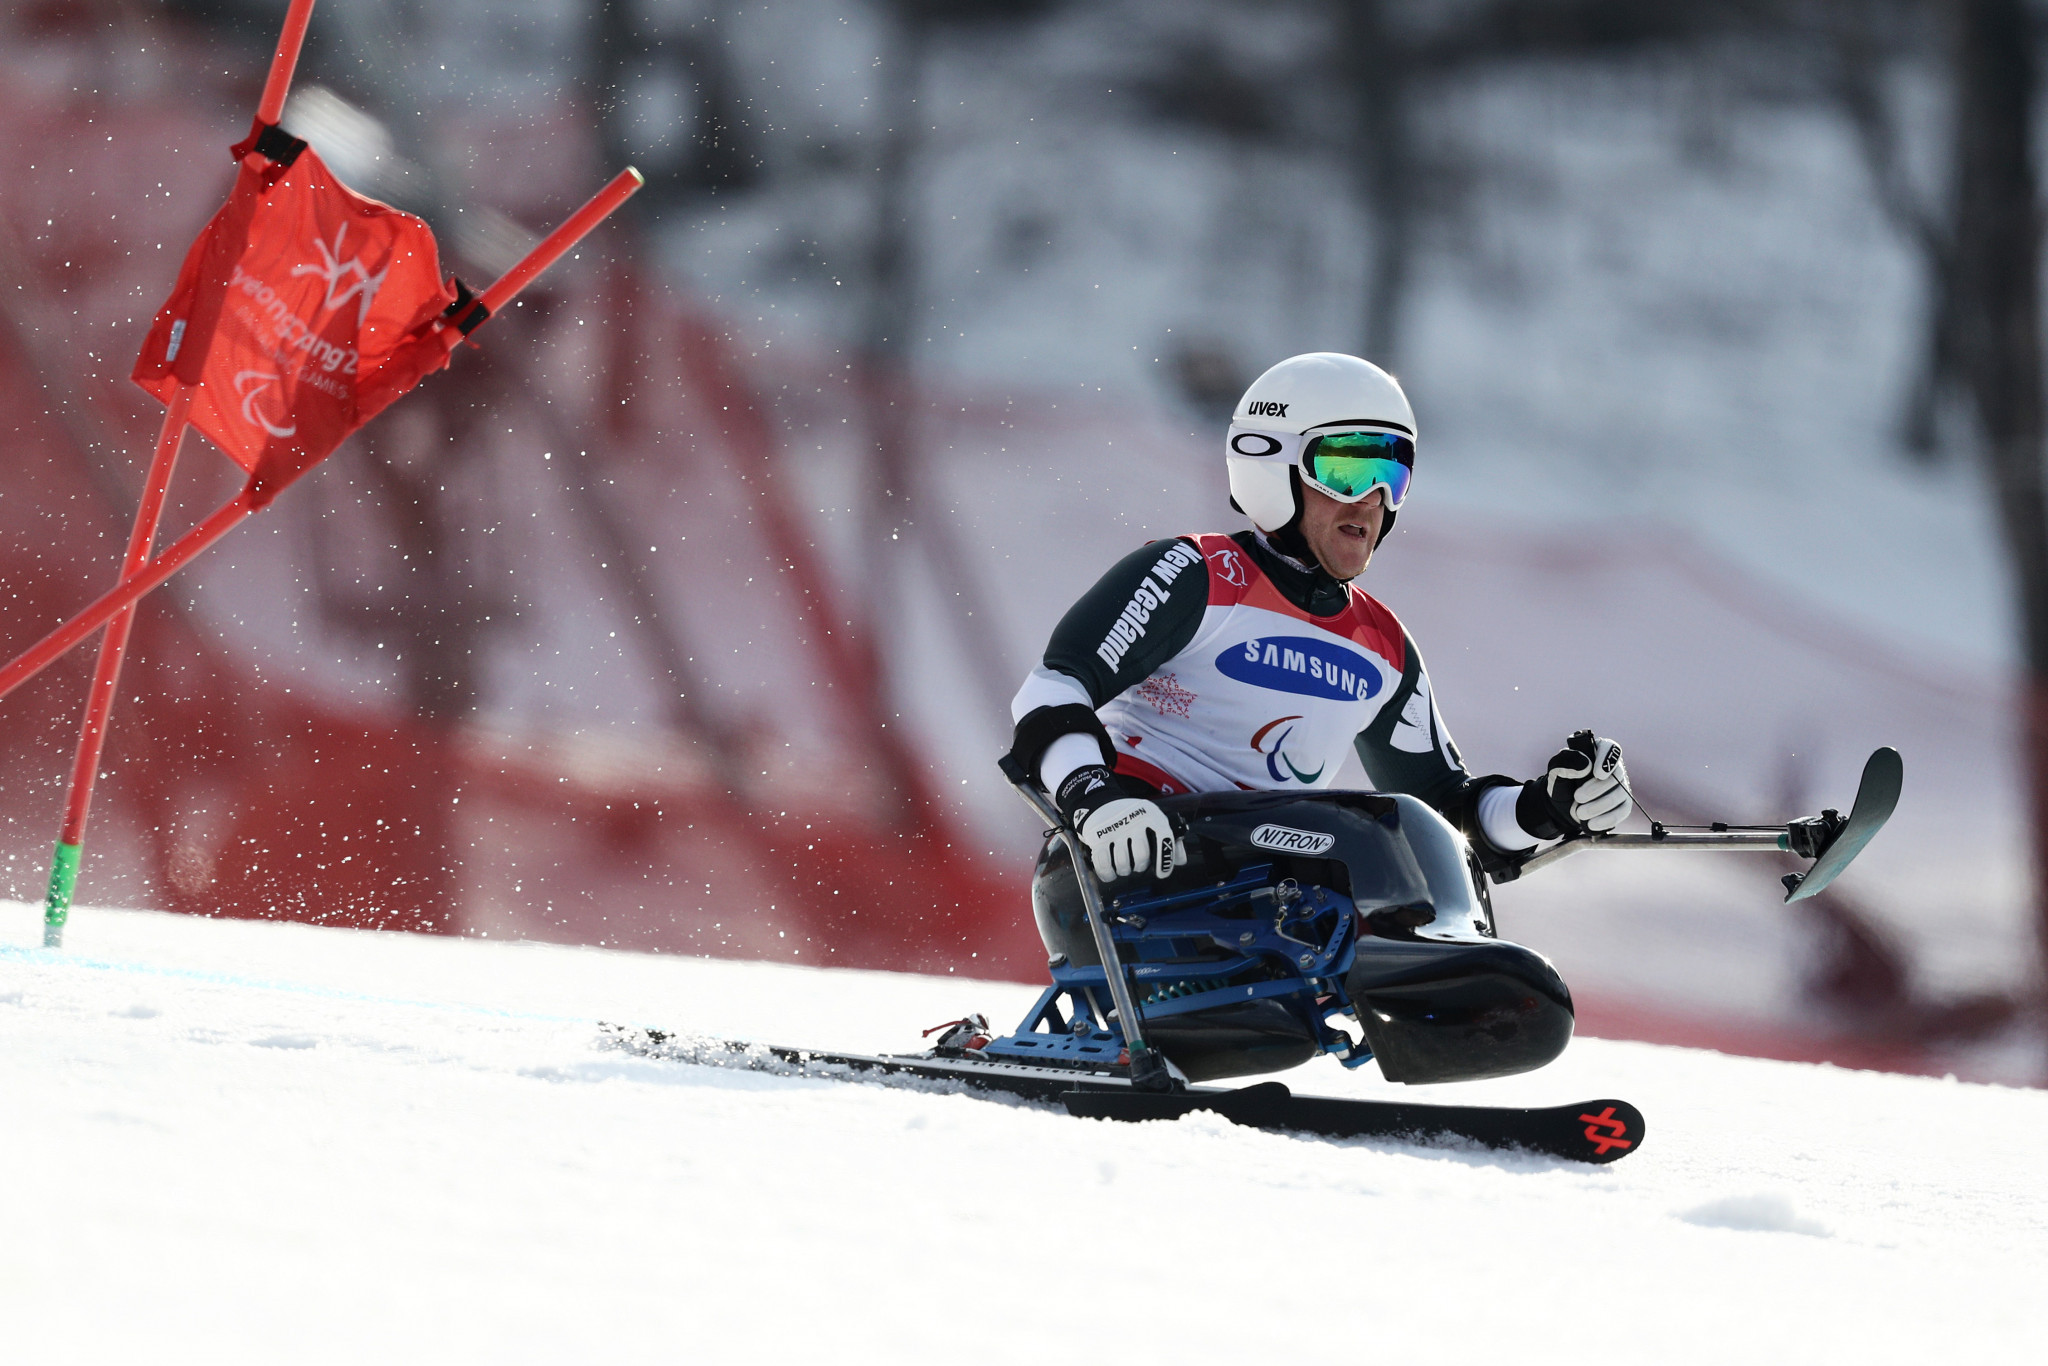 Corey Peters has won two Paralympic medals - silver at Sochi 2014 and bronze at Pyeongchang 2018 ©Getty Images